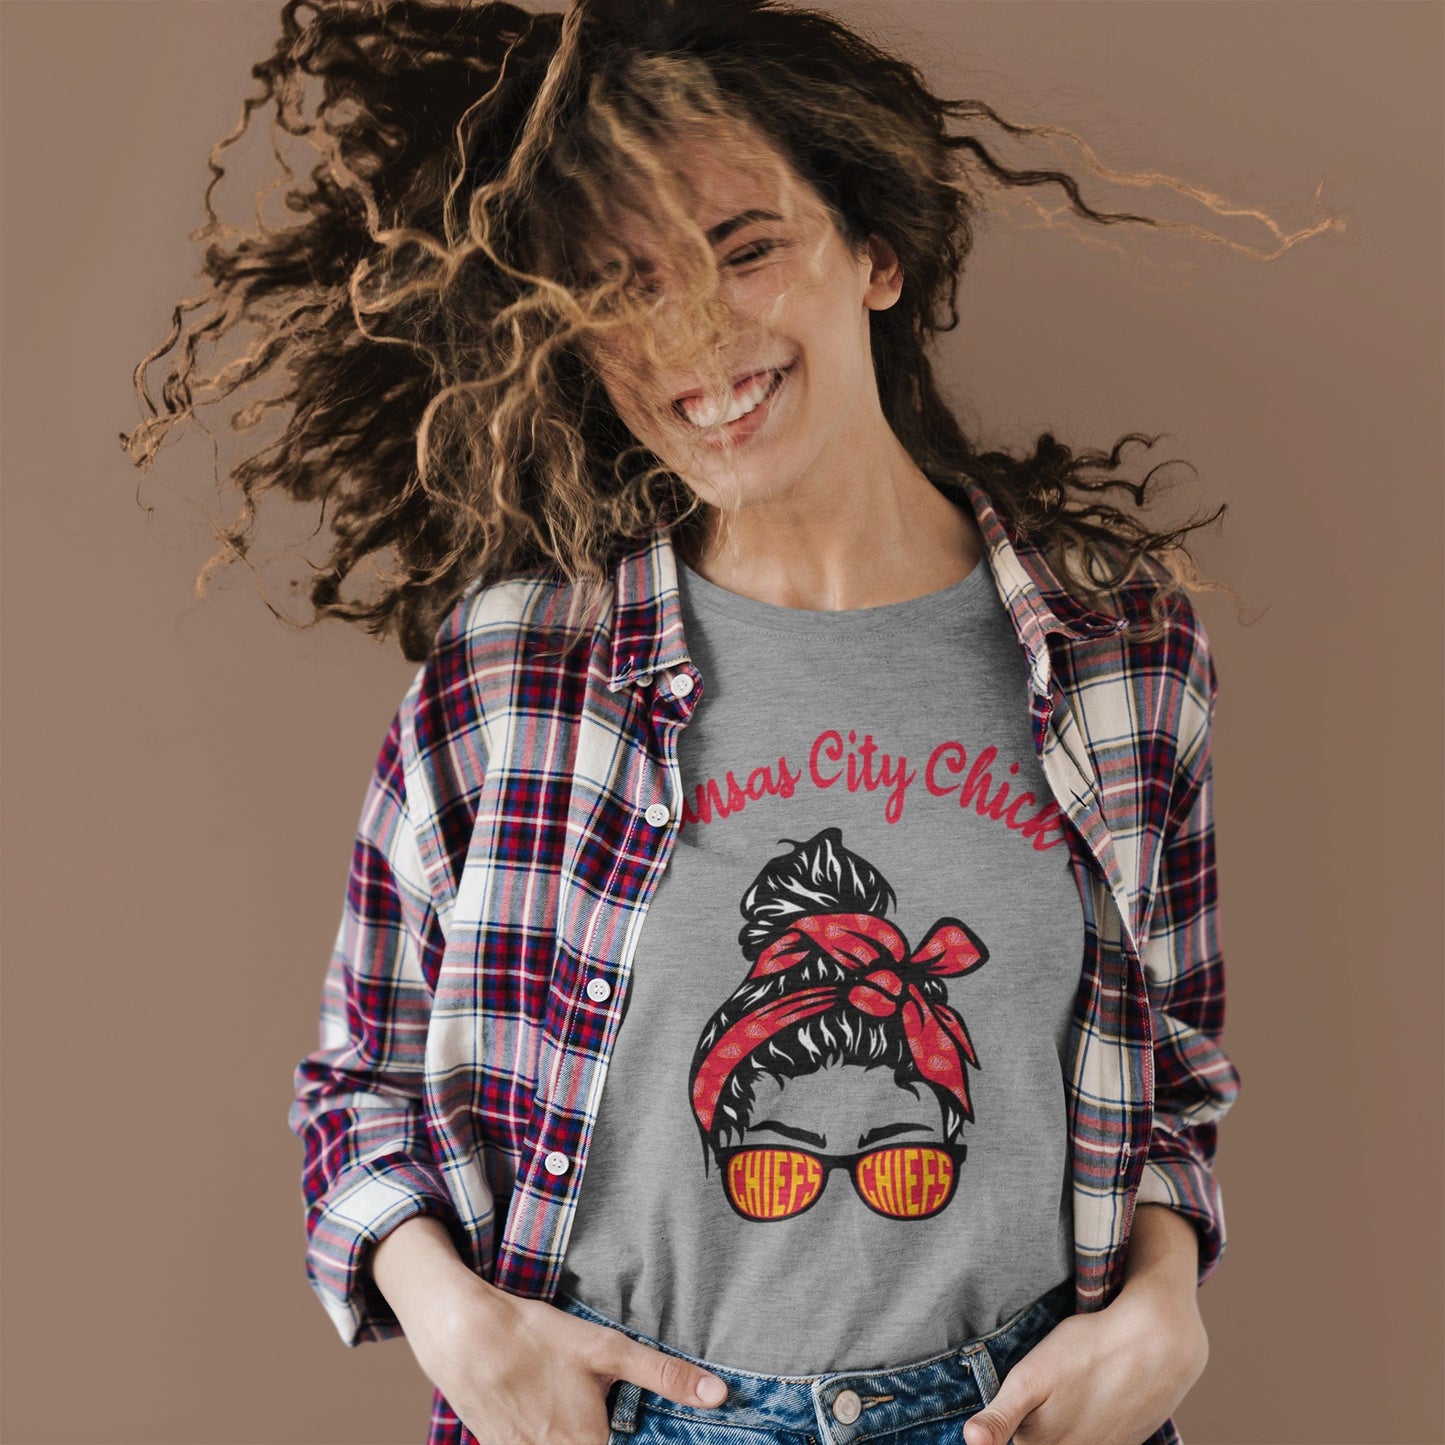 KC Swag Kansas City Chiefs red/black/yellow KANSAS CITY CHICK with girl in bandana and CHIEFS sunglasses graphic on athletic heather grey t-shirt worn by female model tossing her hair around